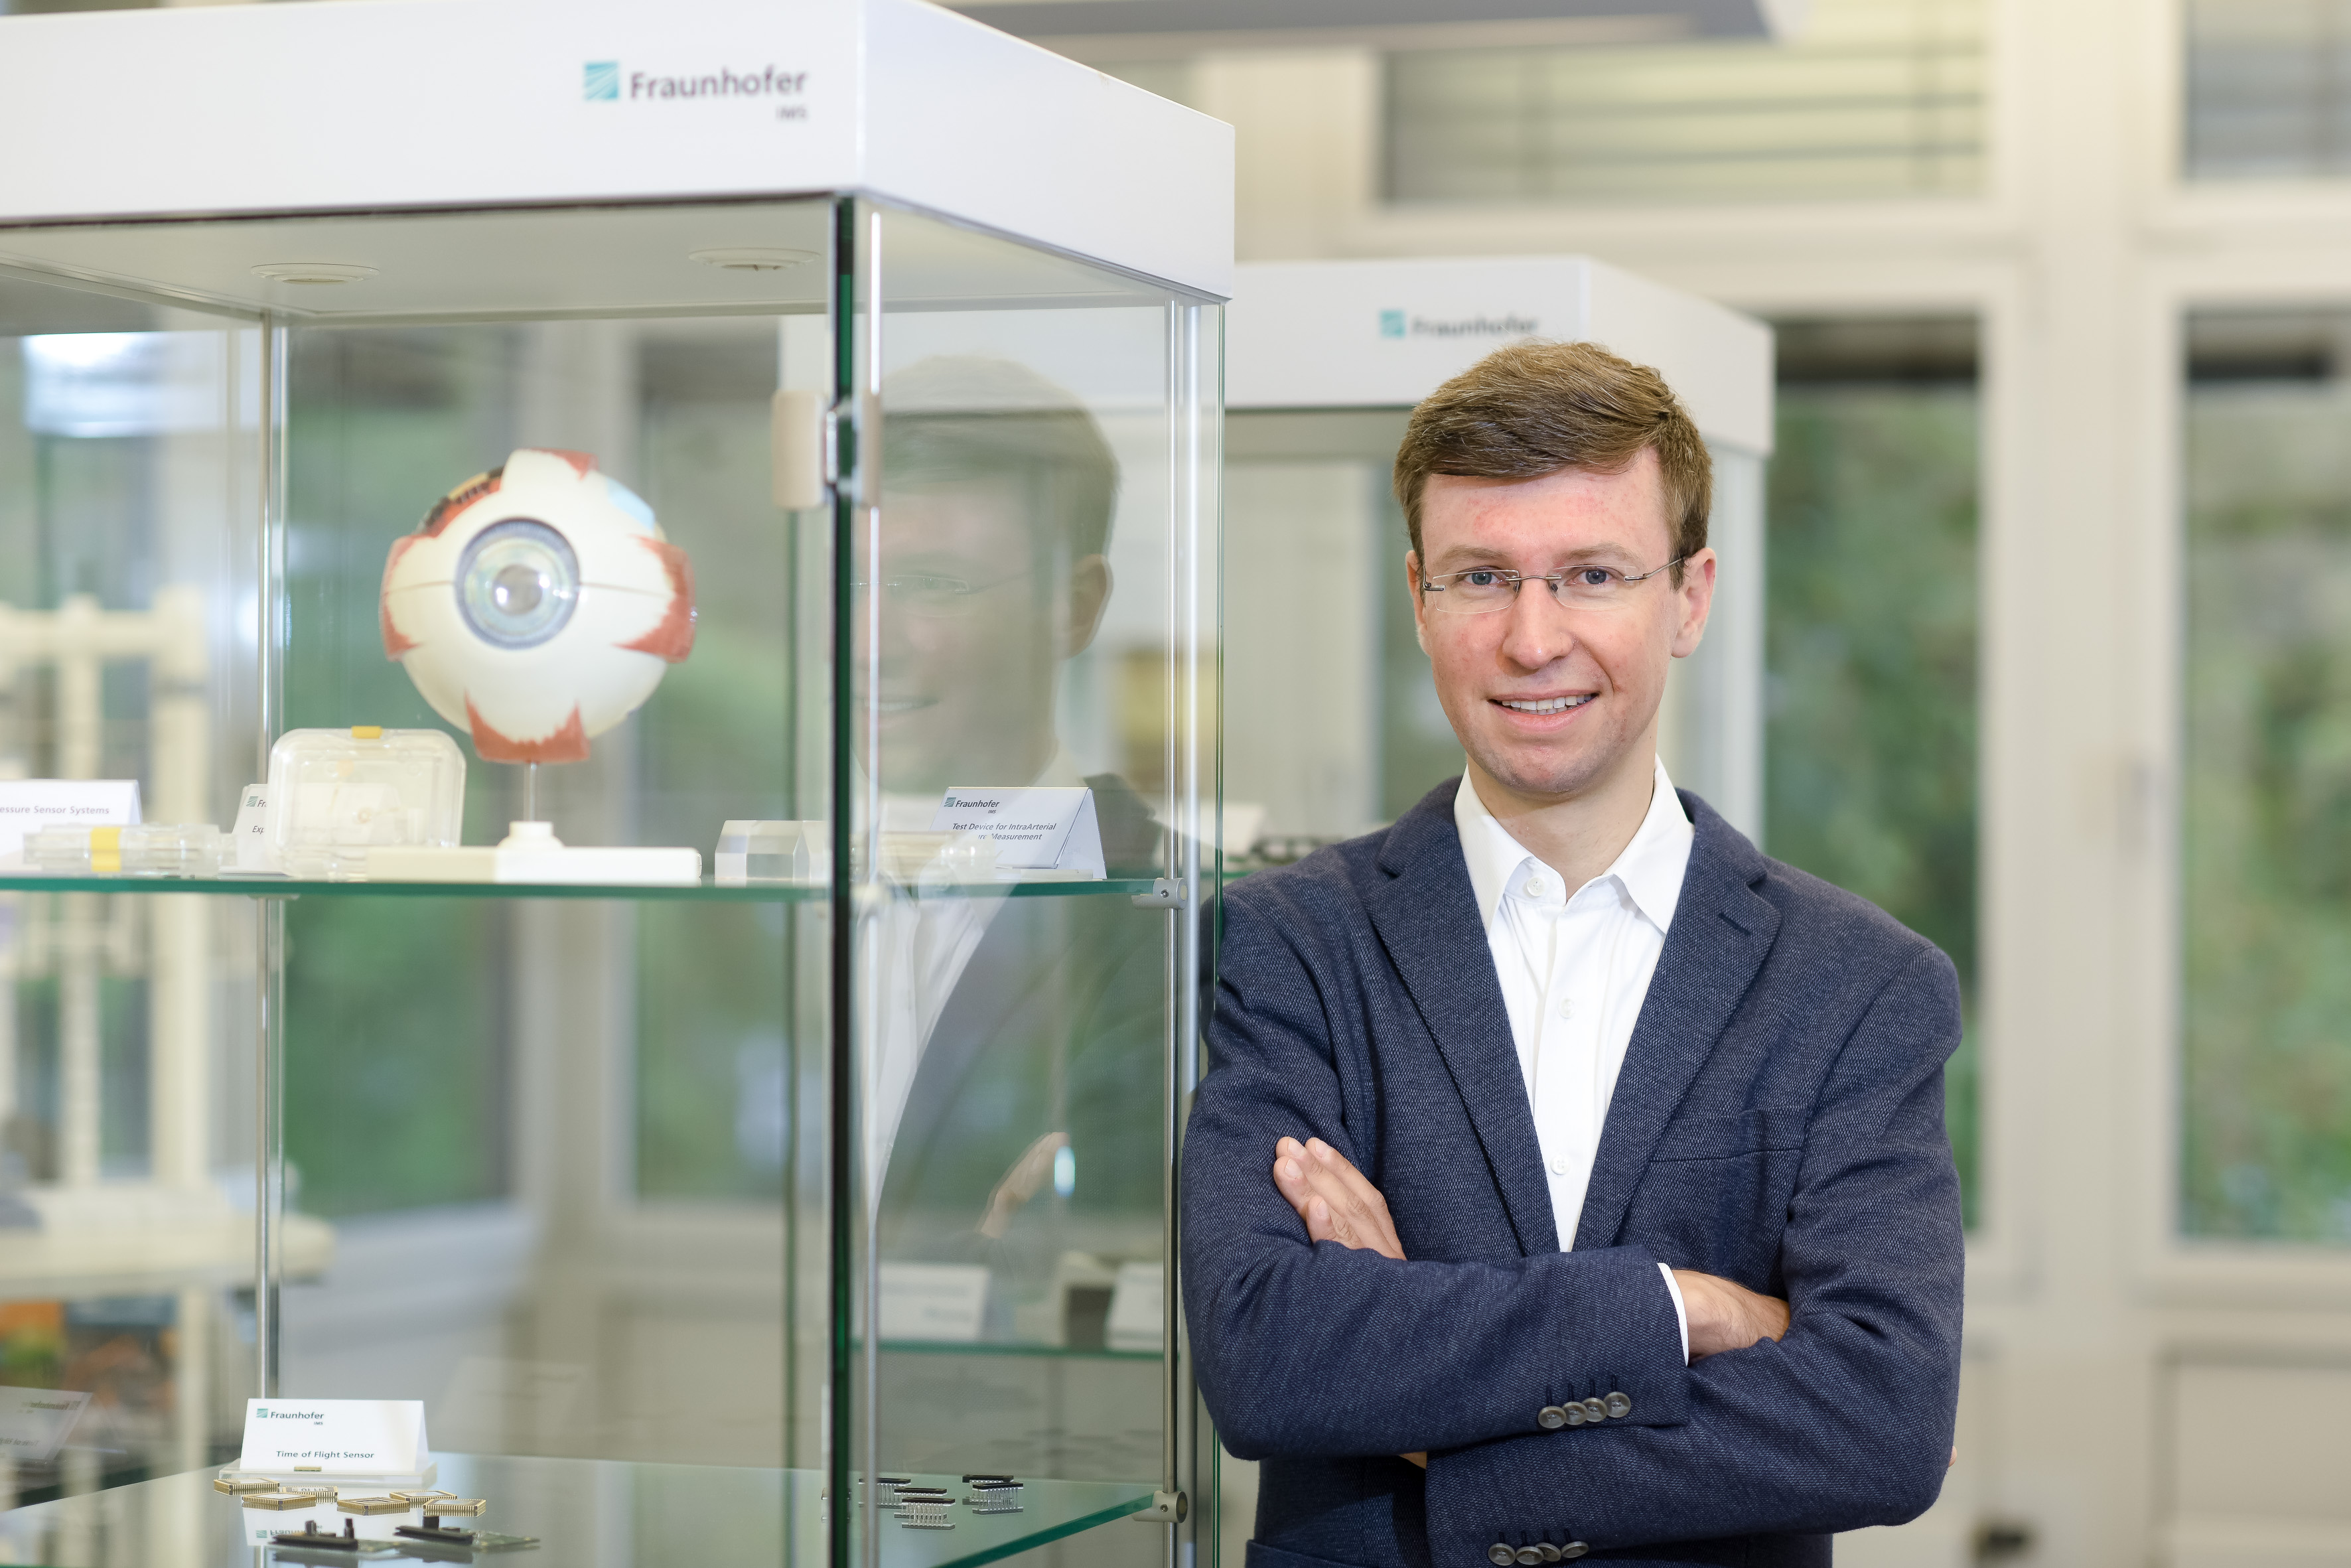 Prof. Dr. Karsten Seidl is looking forward to his new tasks at the Fraunhofer IMS and the University of Duisburg-Essen. With Karsten Seidl, the IMS is strengthening bio-sensor technology – his research focuses on biosensor systems and bio-nanosensor technology.